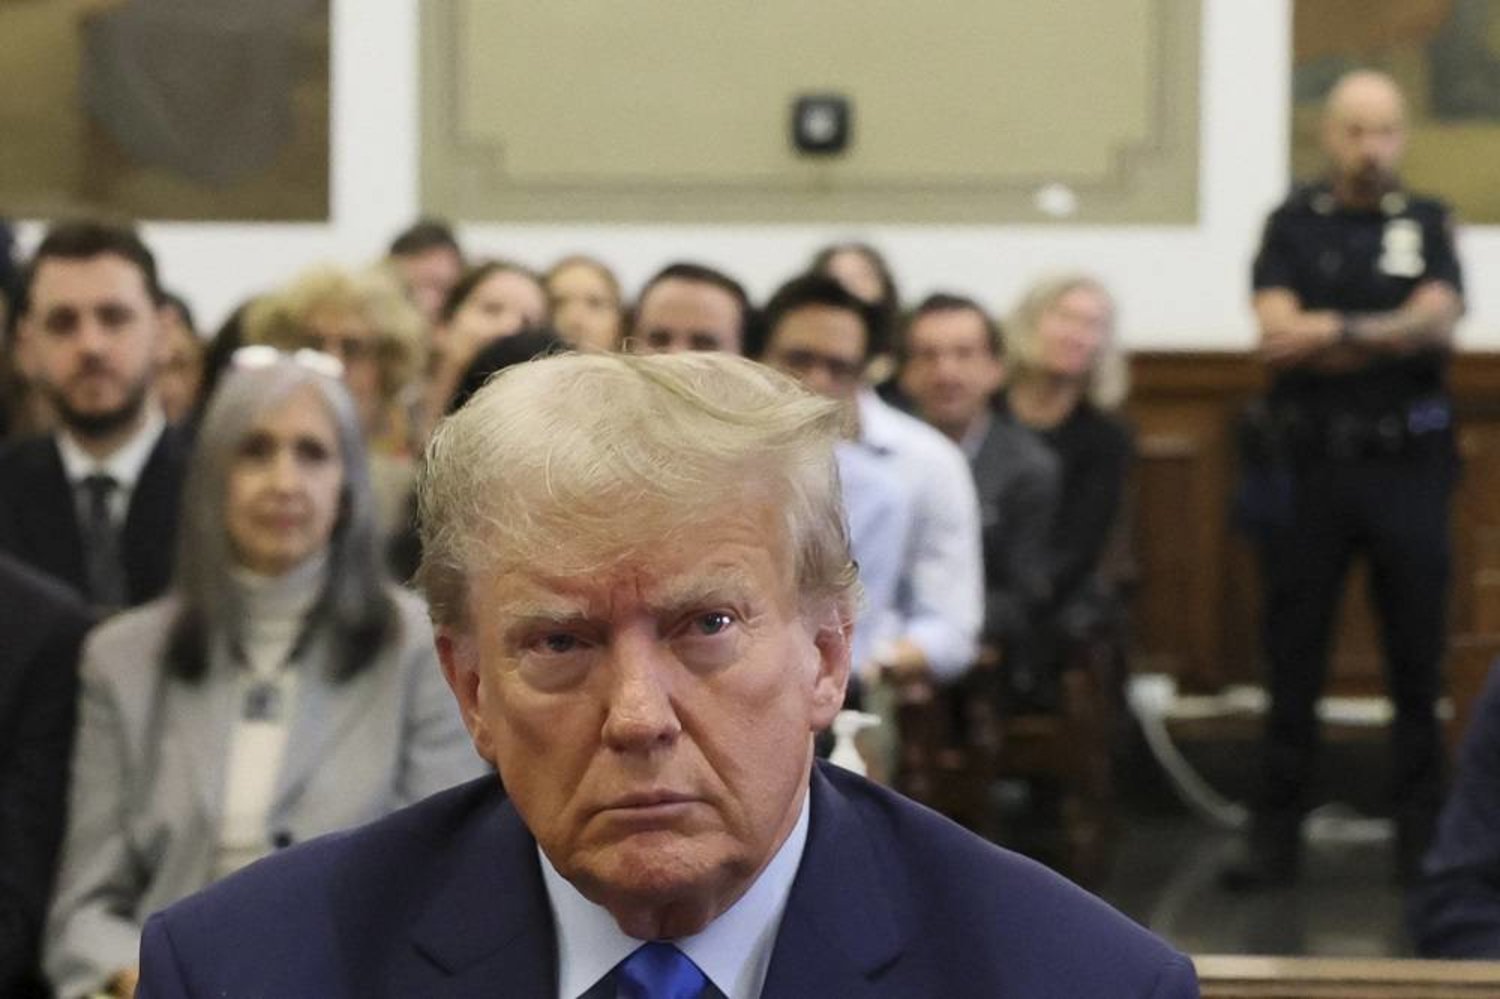  Former US President Donald Trump attends the trial of himself, his adult sons, the Trump Organization and others in a civil fraud case brought by state Attorney General Letitia James, at a Manhattan courthouse, in New York City, on October 2, 2023. (AFP)